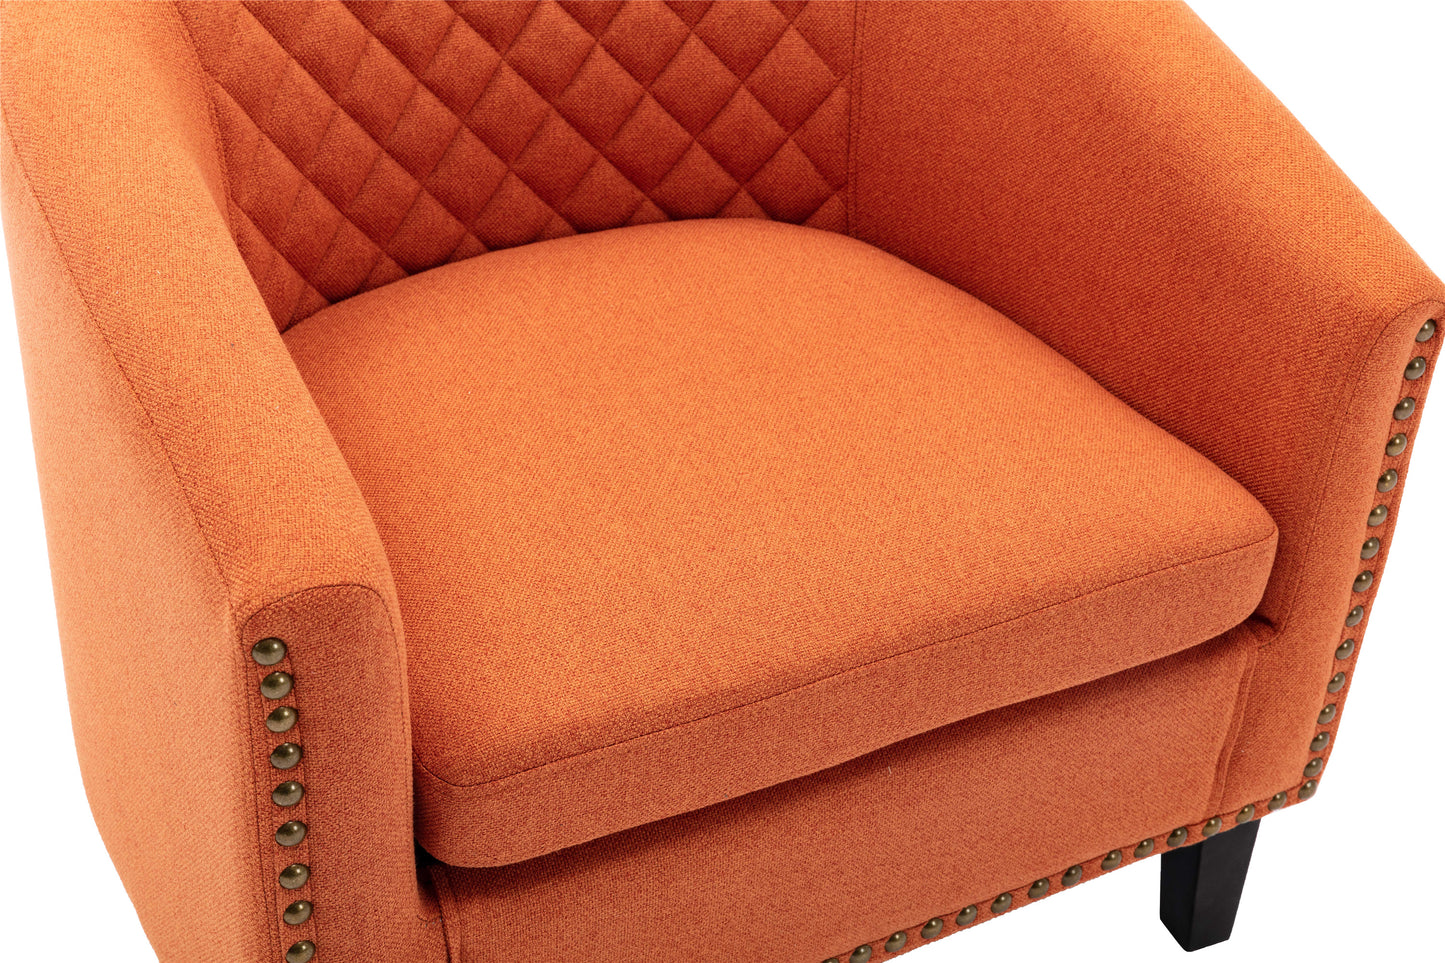 Accent Barrel Chair  Chair with Nailheads and Solid Wood Legs Orange Linen